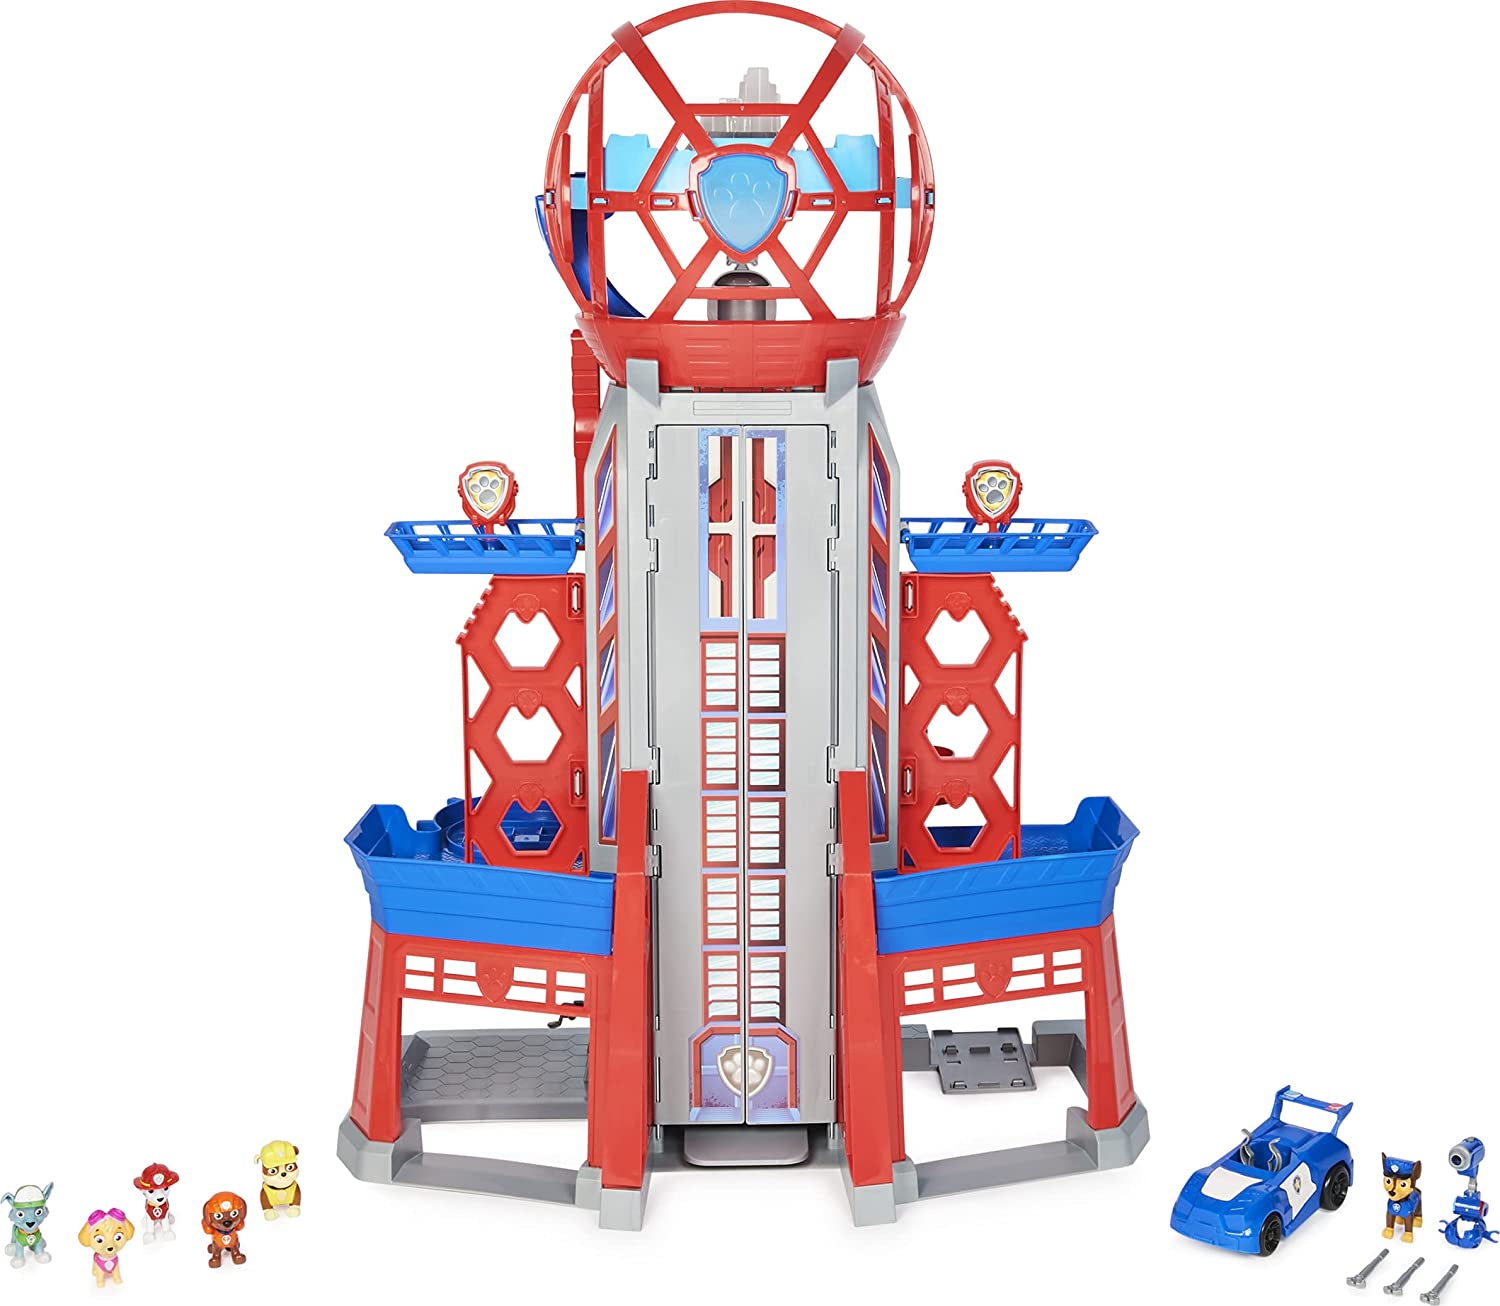 Paw Patrol The Movie Ulimate City Tower